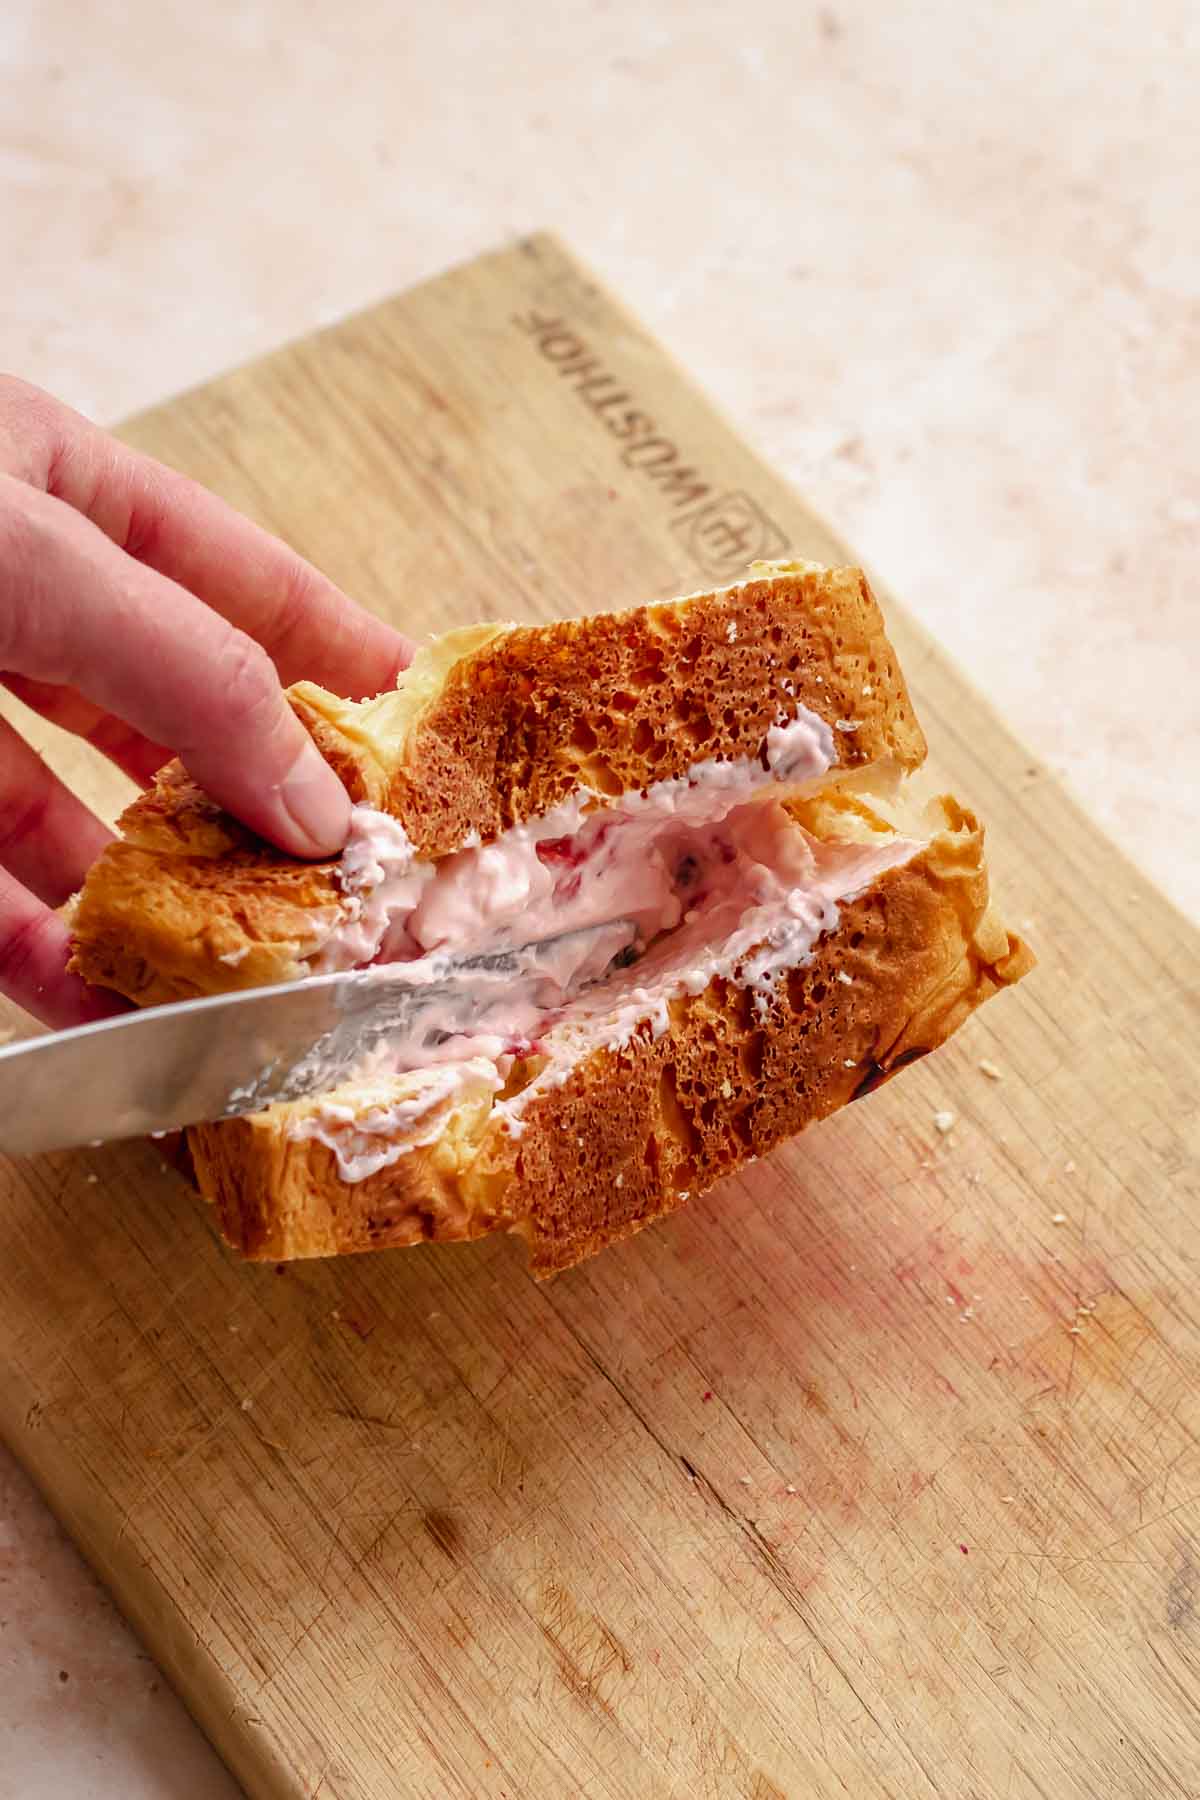 A hand uses a knife to add strawberry cream cheese into the brioche bread pocket.